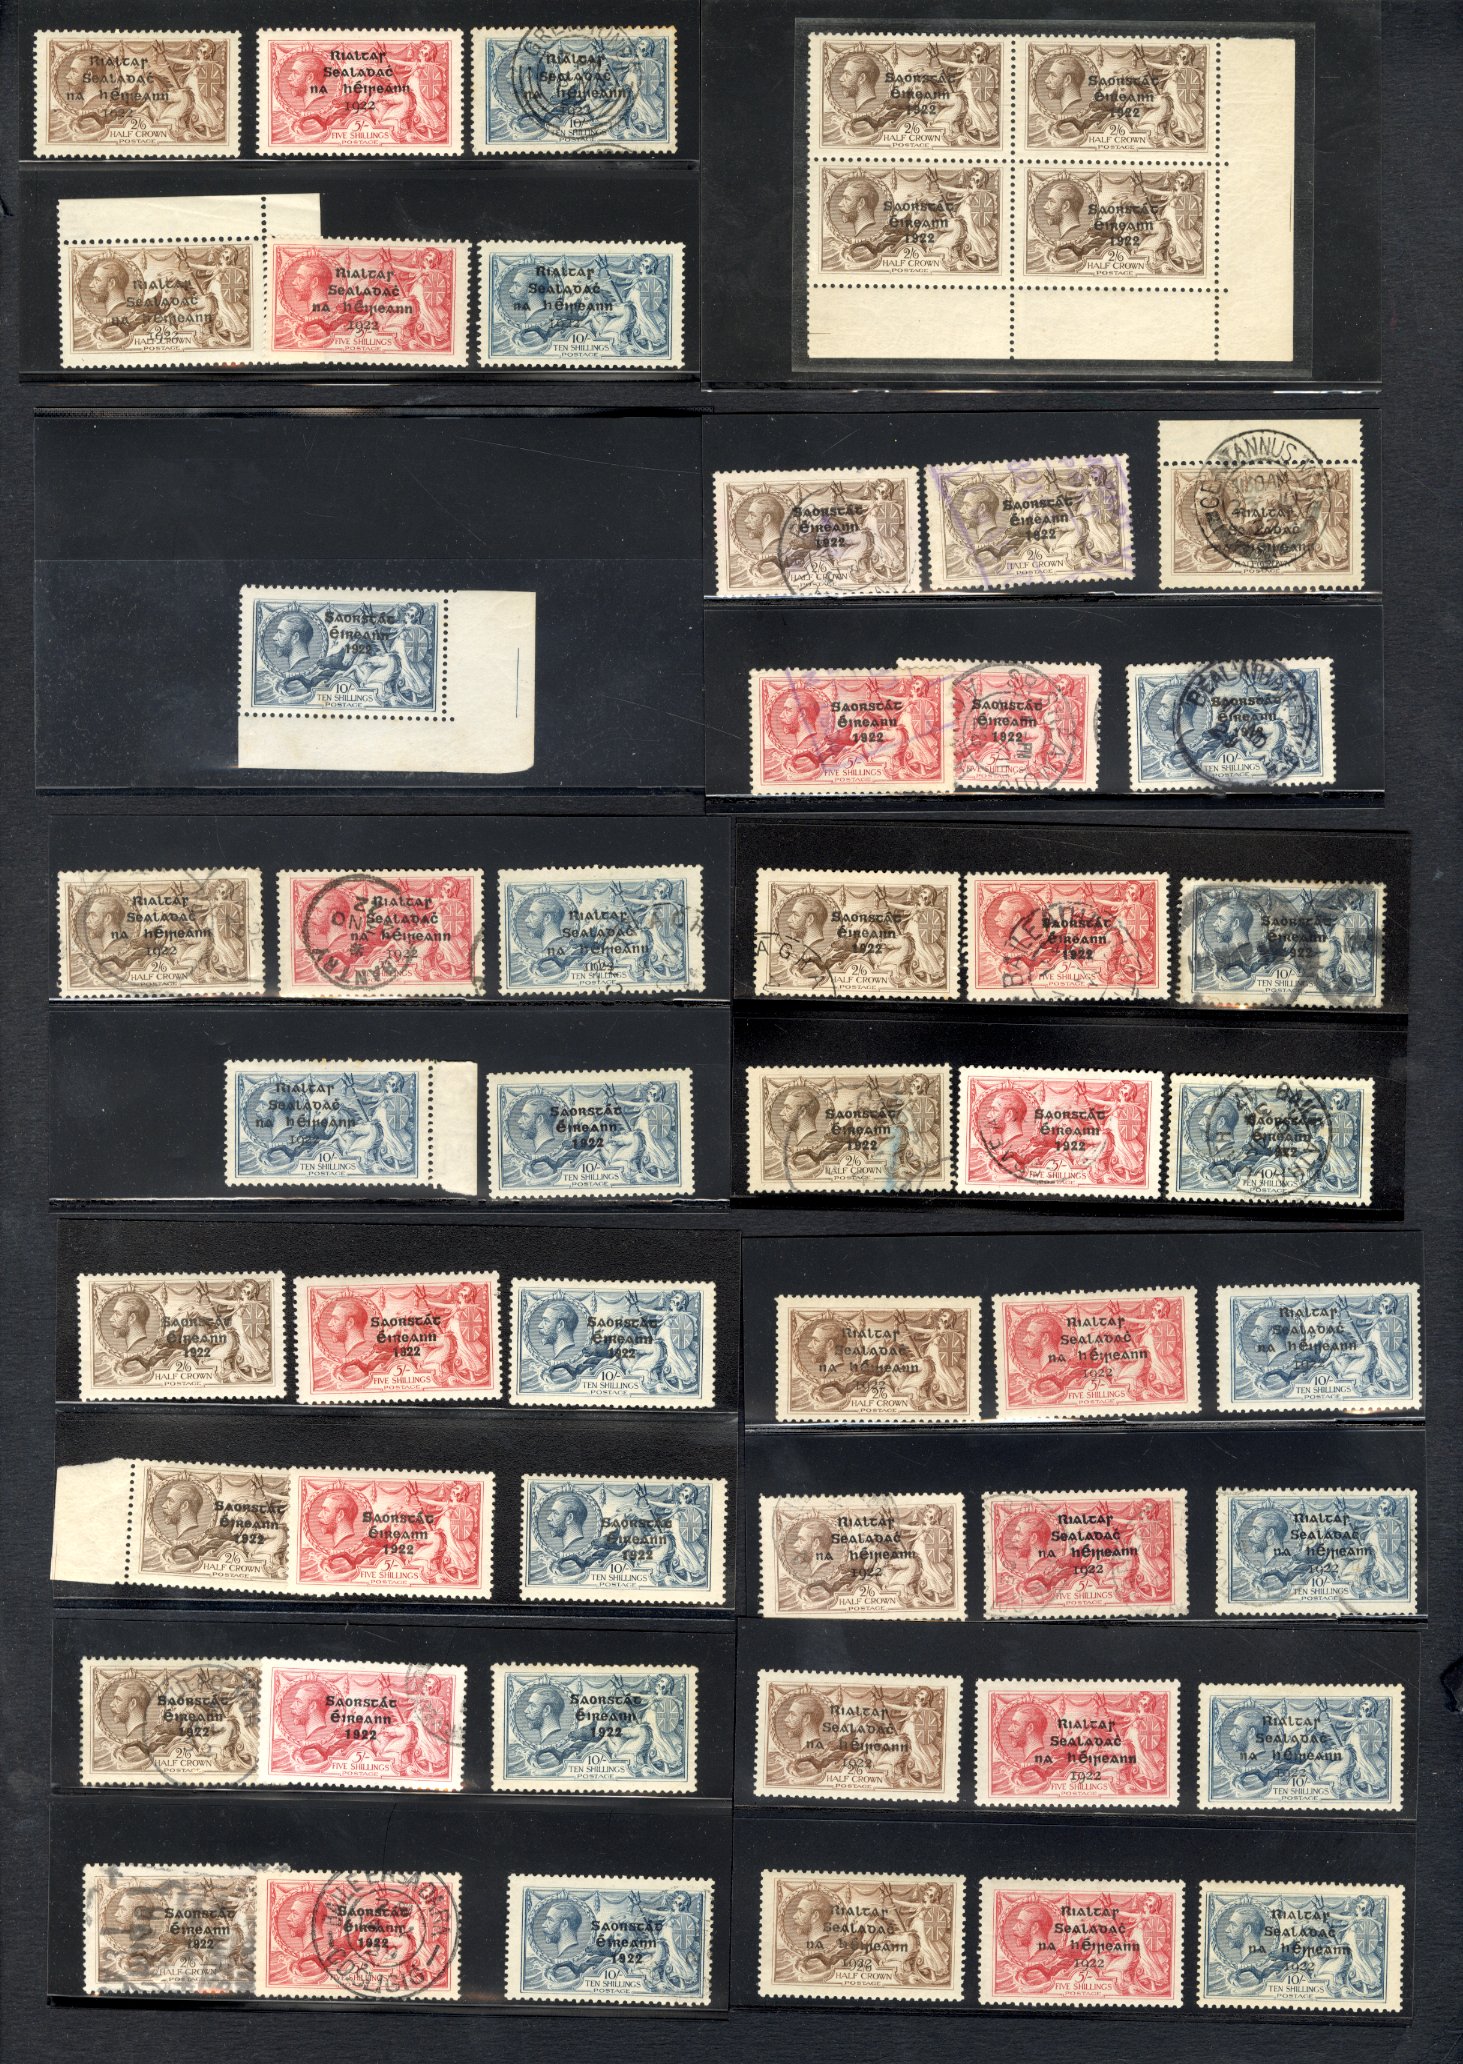 Lot 1488 - LARGE LOTS AND COLLECTIONS ISRAEL - Interim Period  -  Cherrystone Auctions U.S. & Worldwide Stamps & Postal History